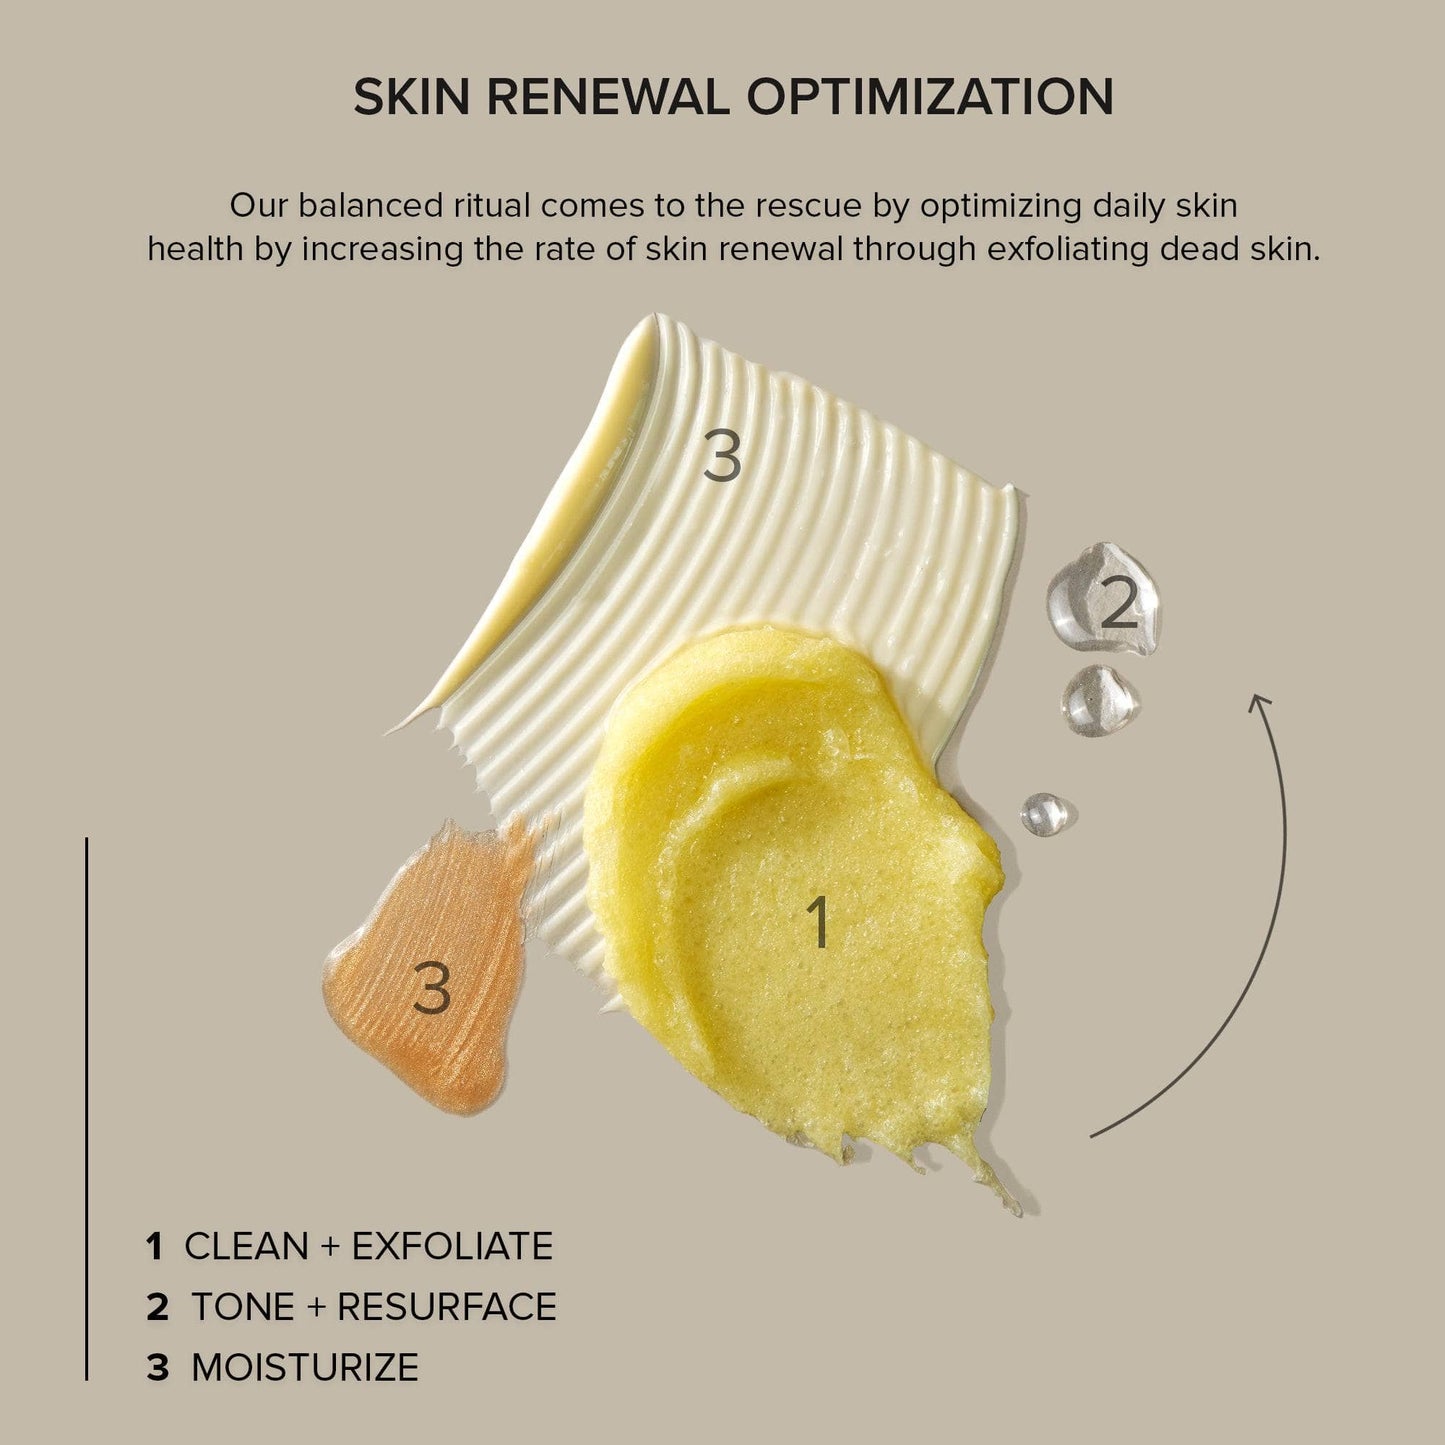 texture swatches of nudeskin's skin renewal optimization products